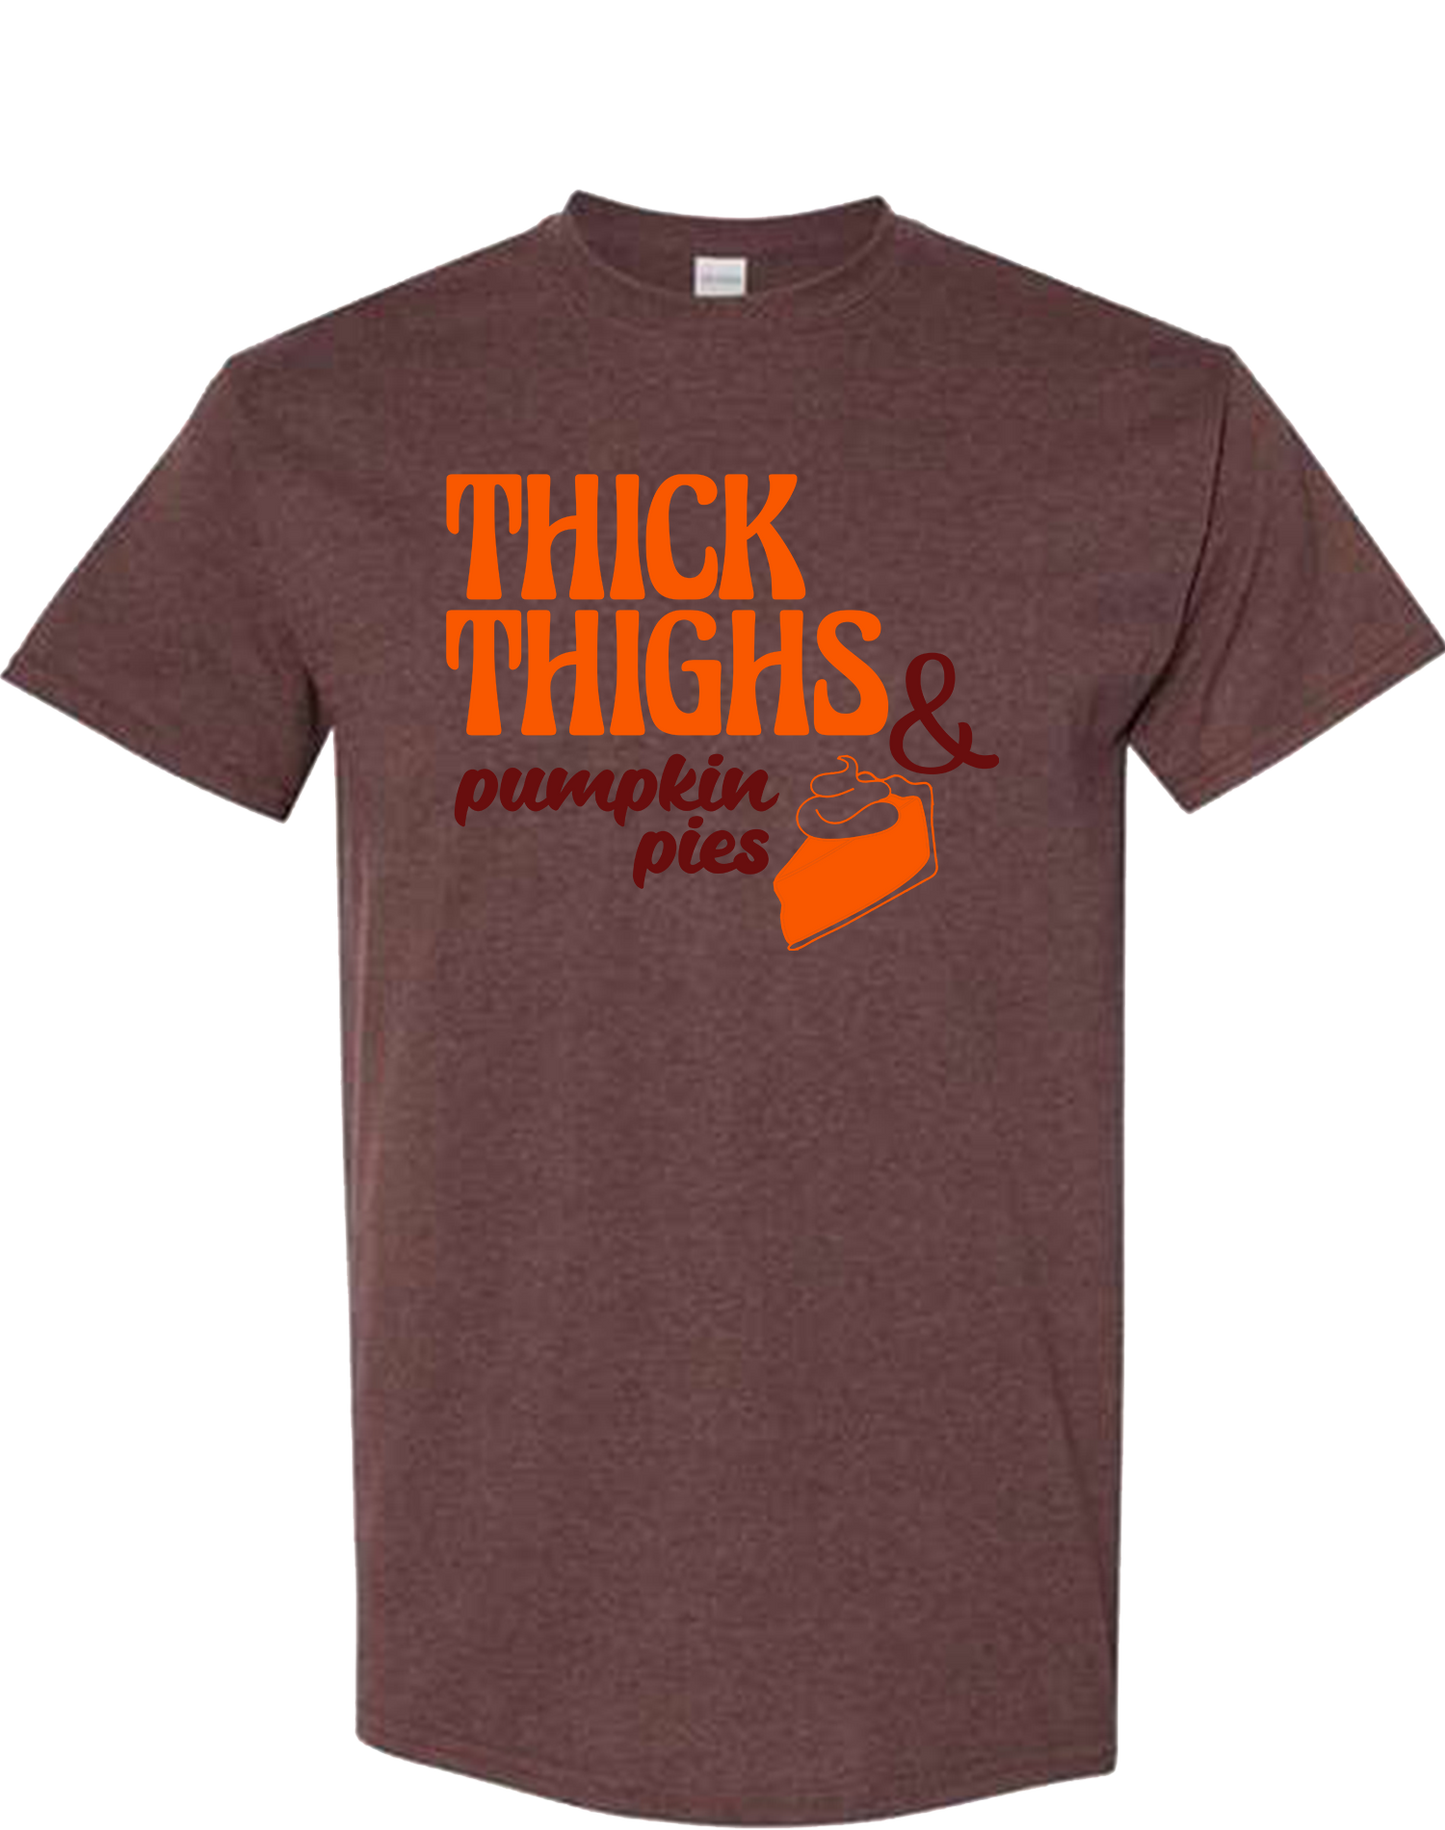 Thick Thighs and Pumpkin Pies